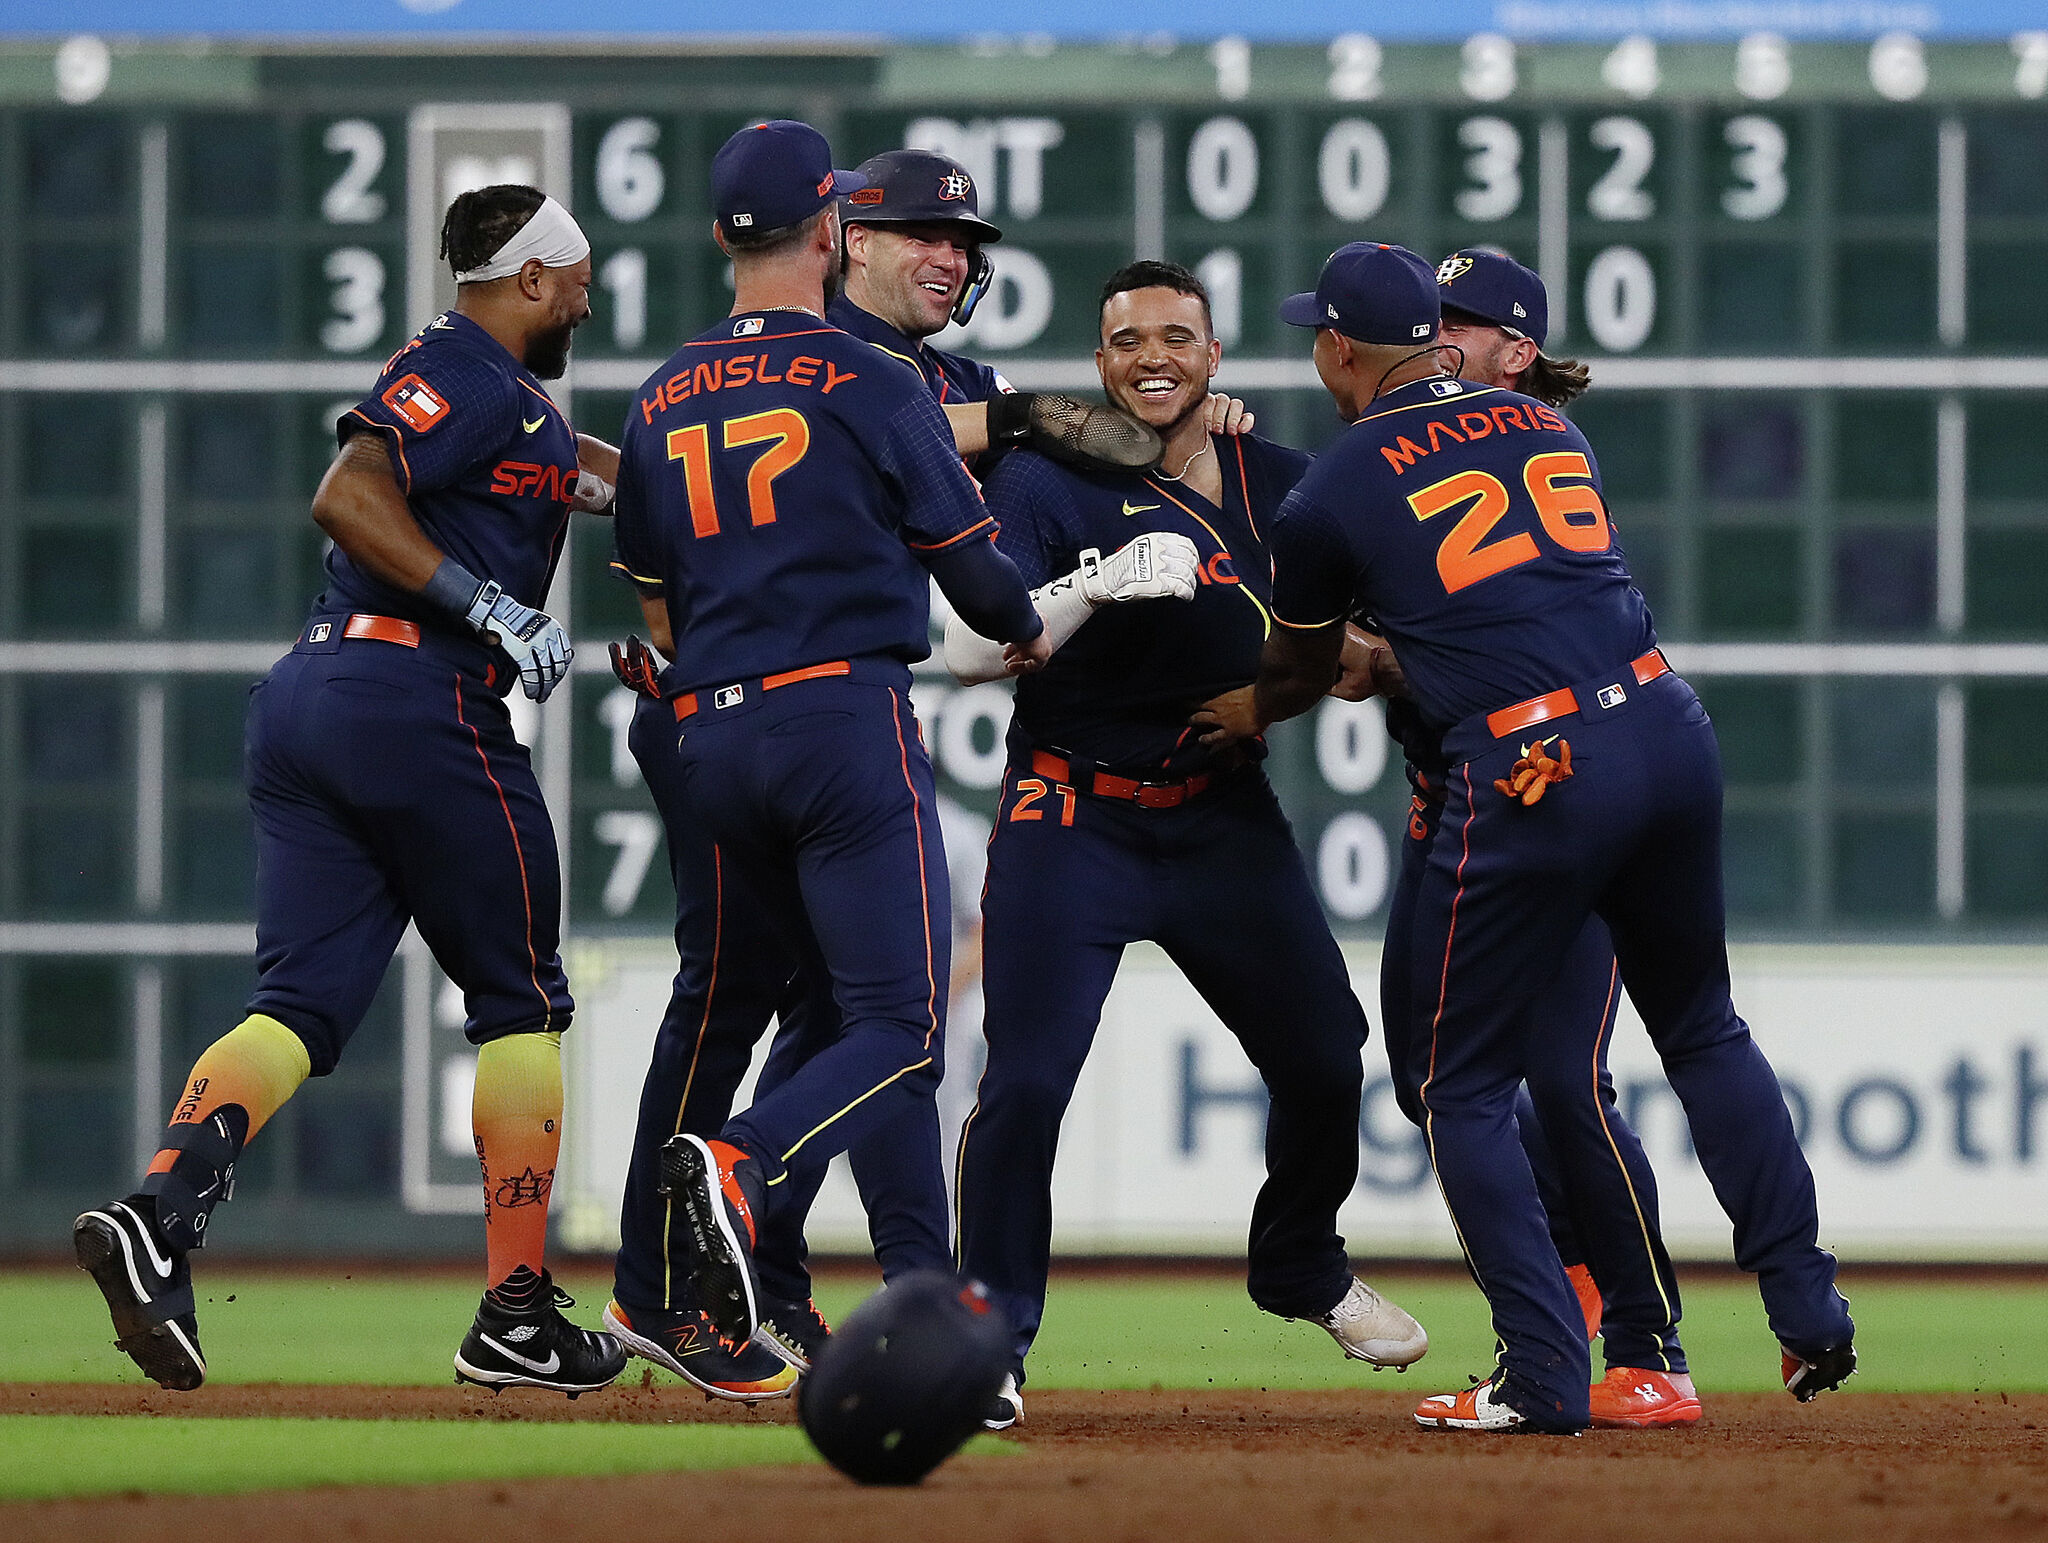 Rookie leads Astros to thrilling walk-off win over Rangers